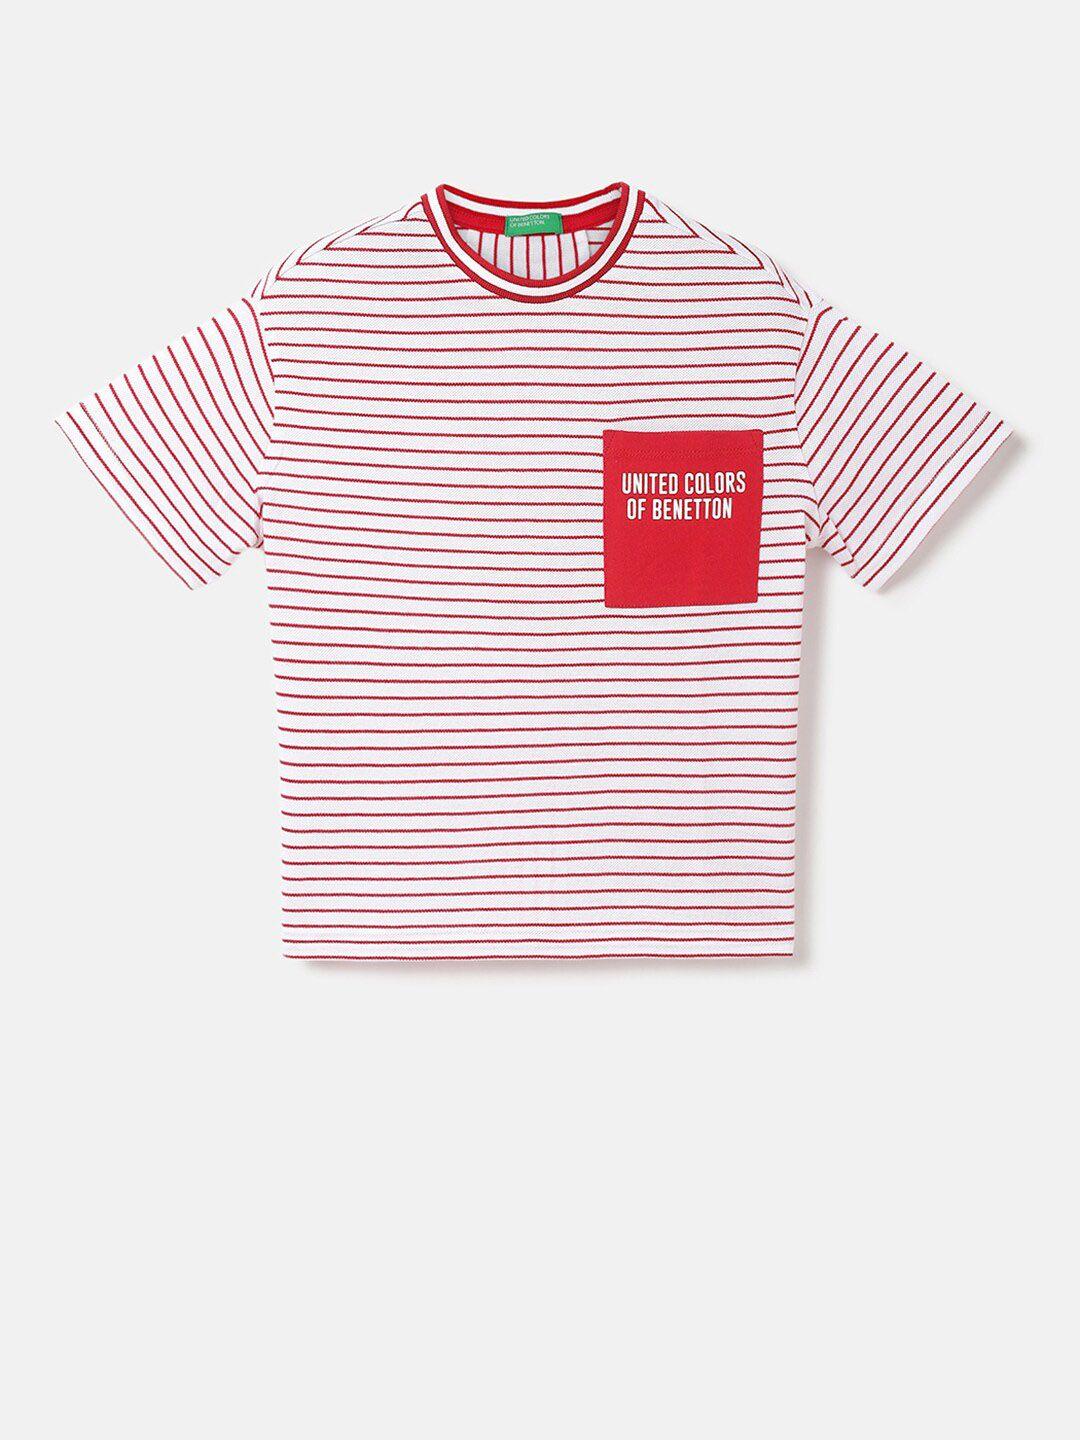 united-colors-of-benetton-boys-striped-cotton-t-shirt